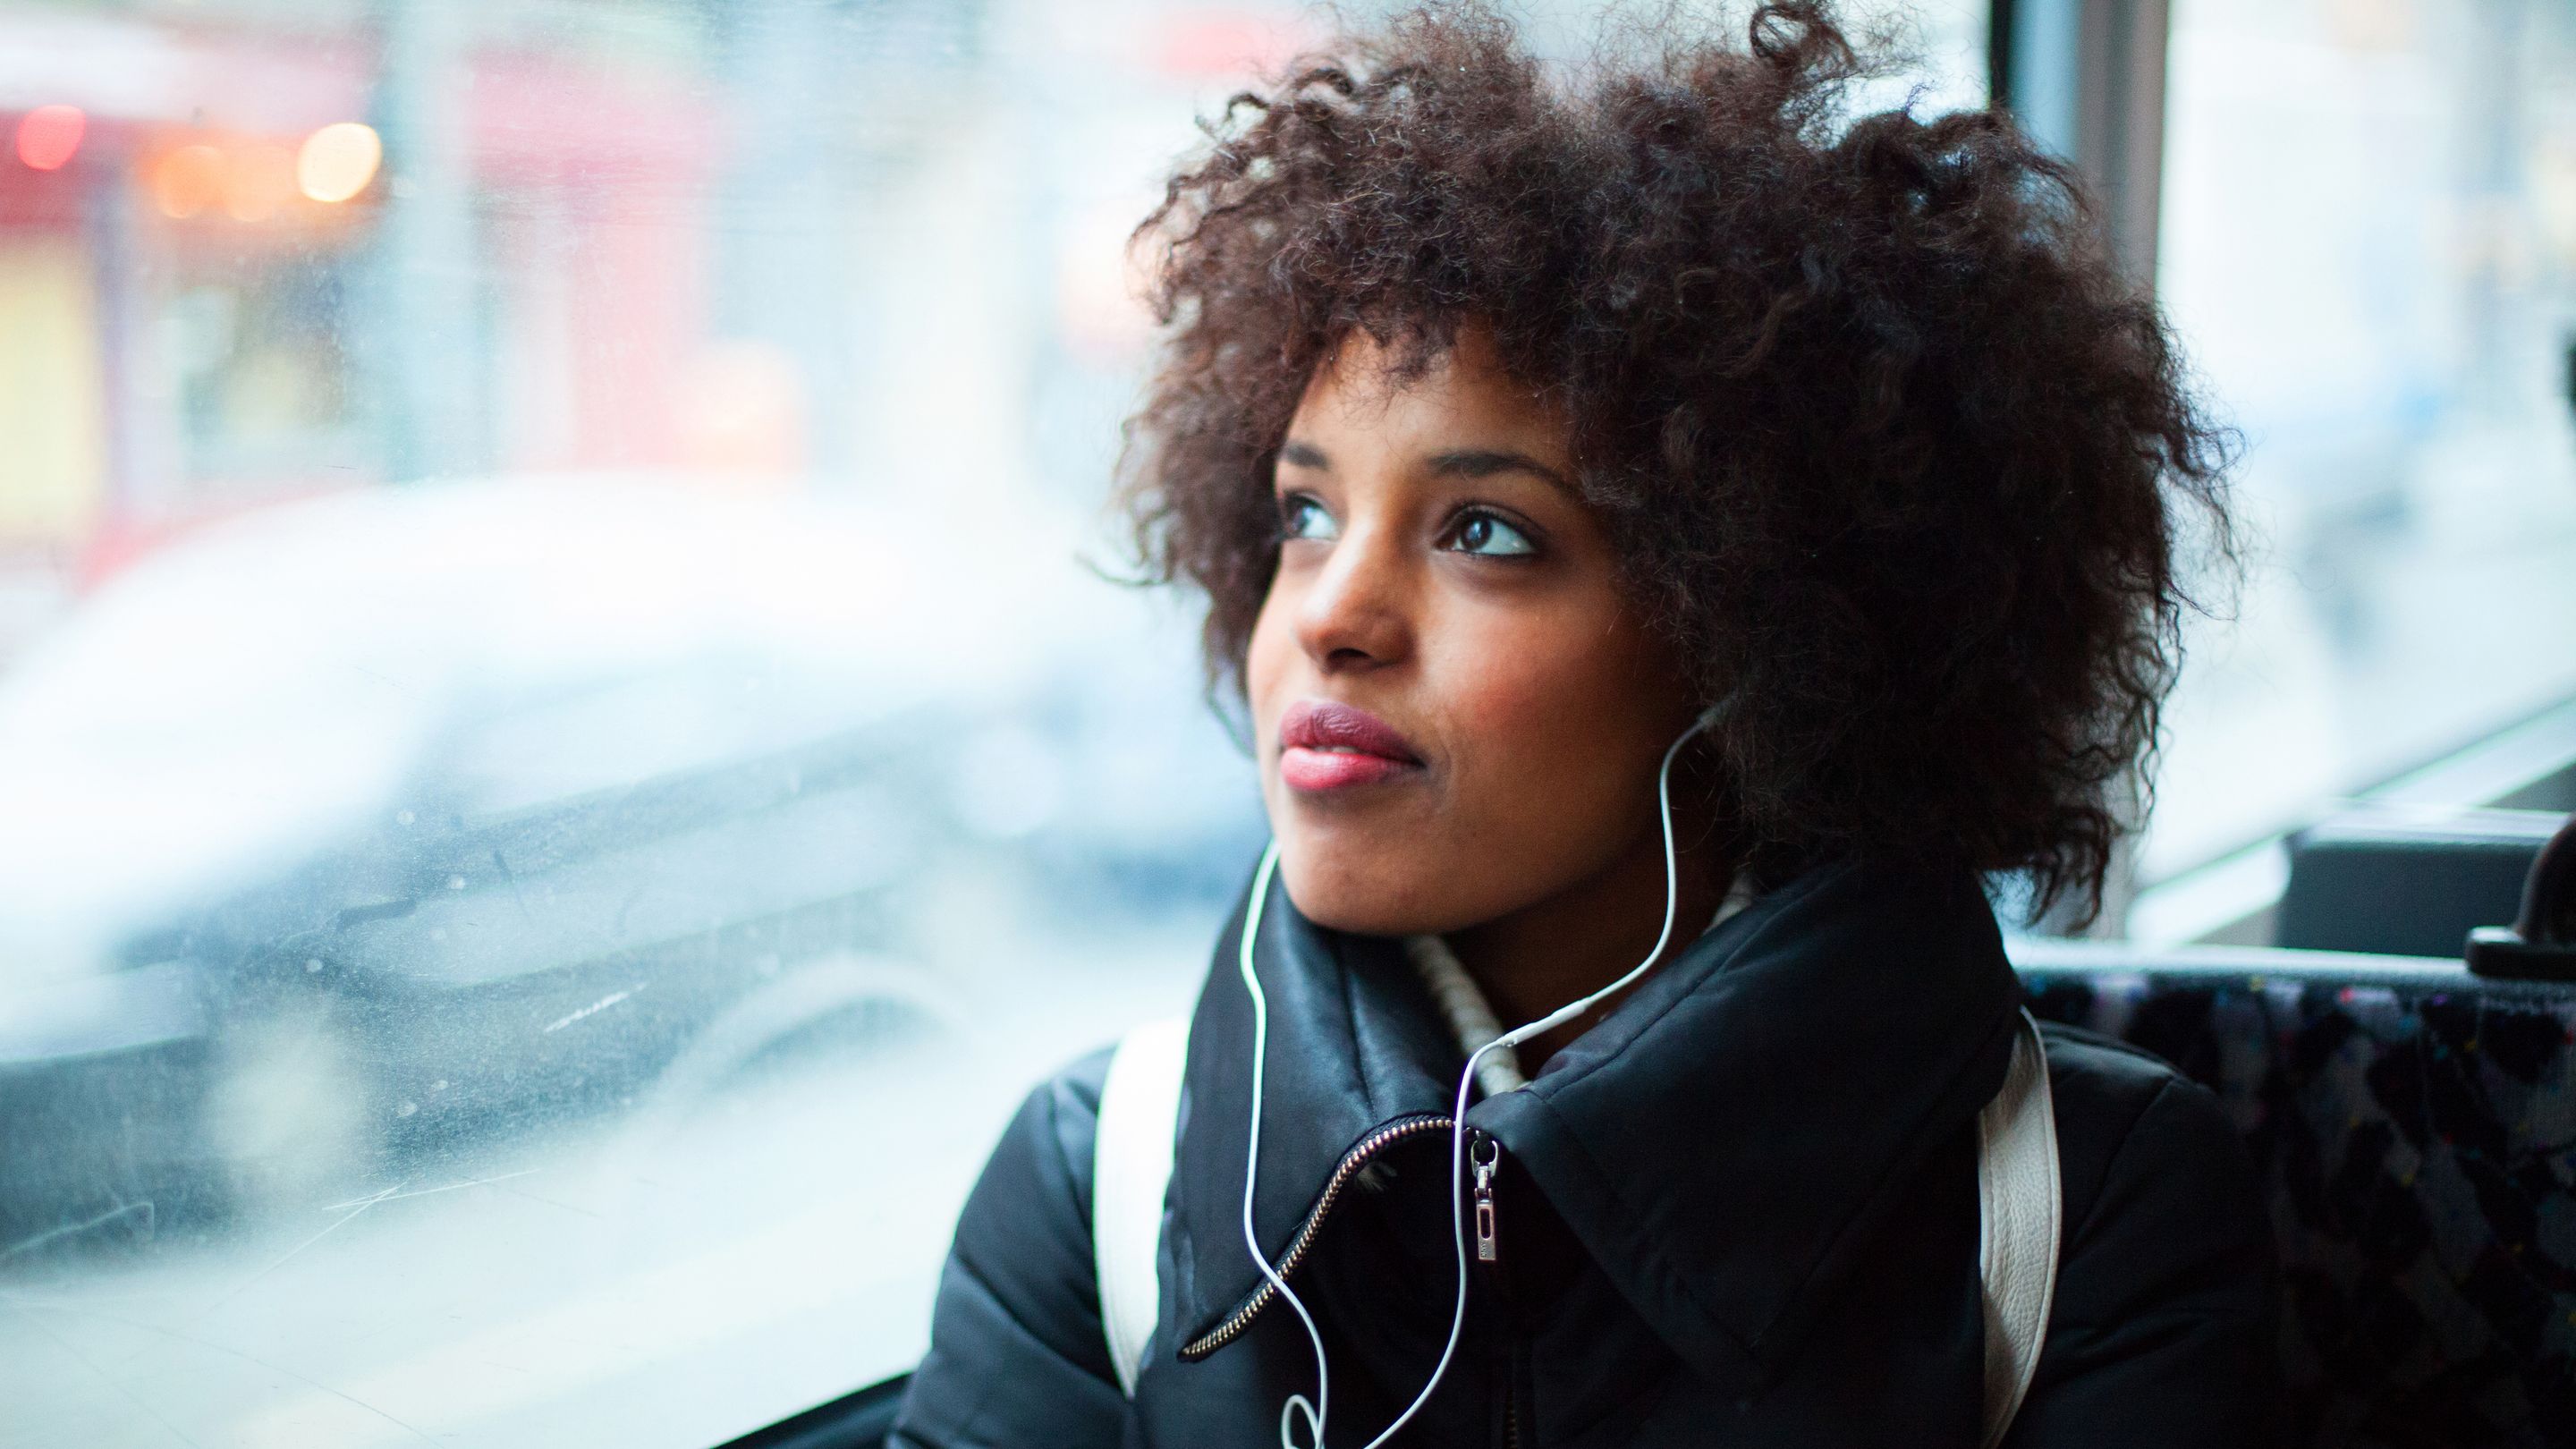 Podcasts That Expand Our Hearts and Minds